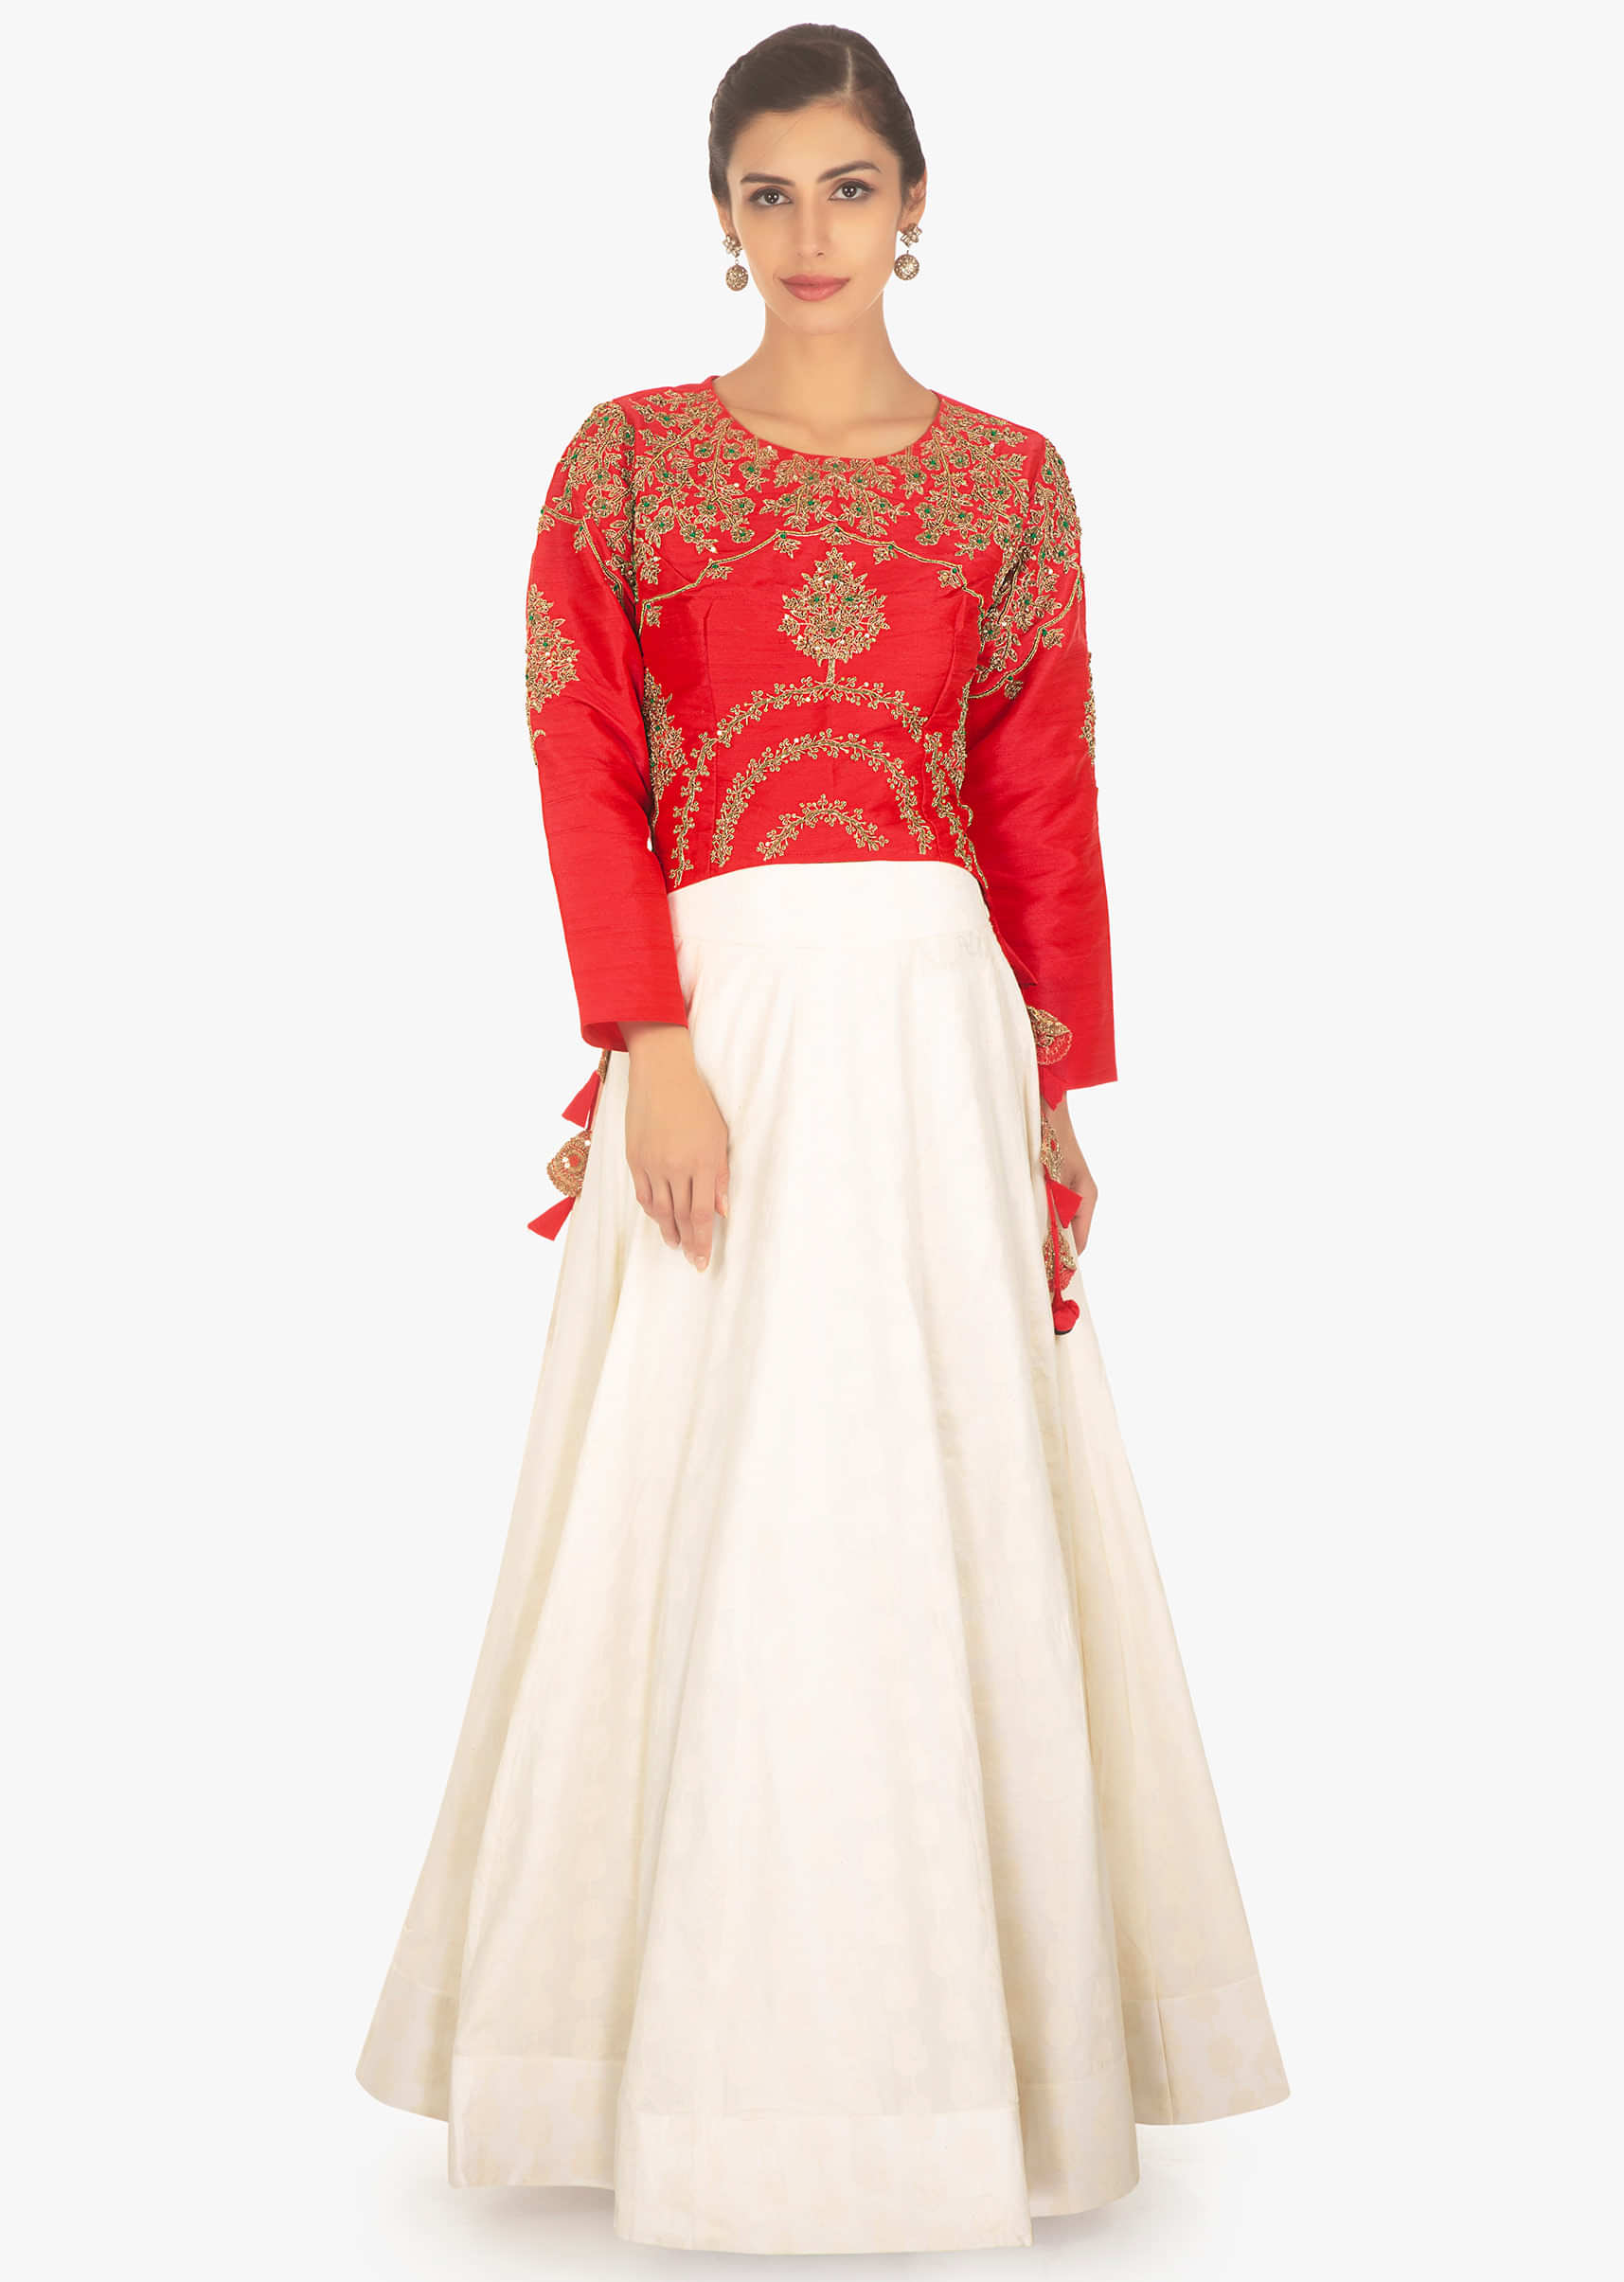 Off white jacquard lehenga paired with red top 